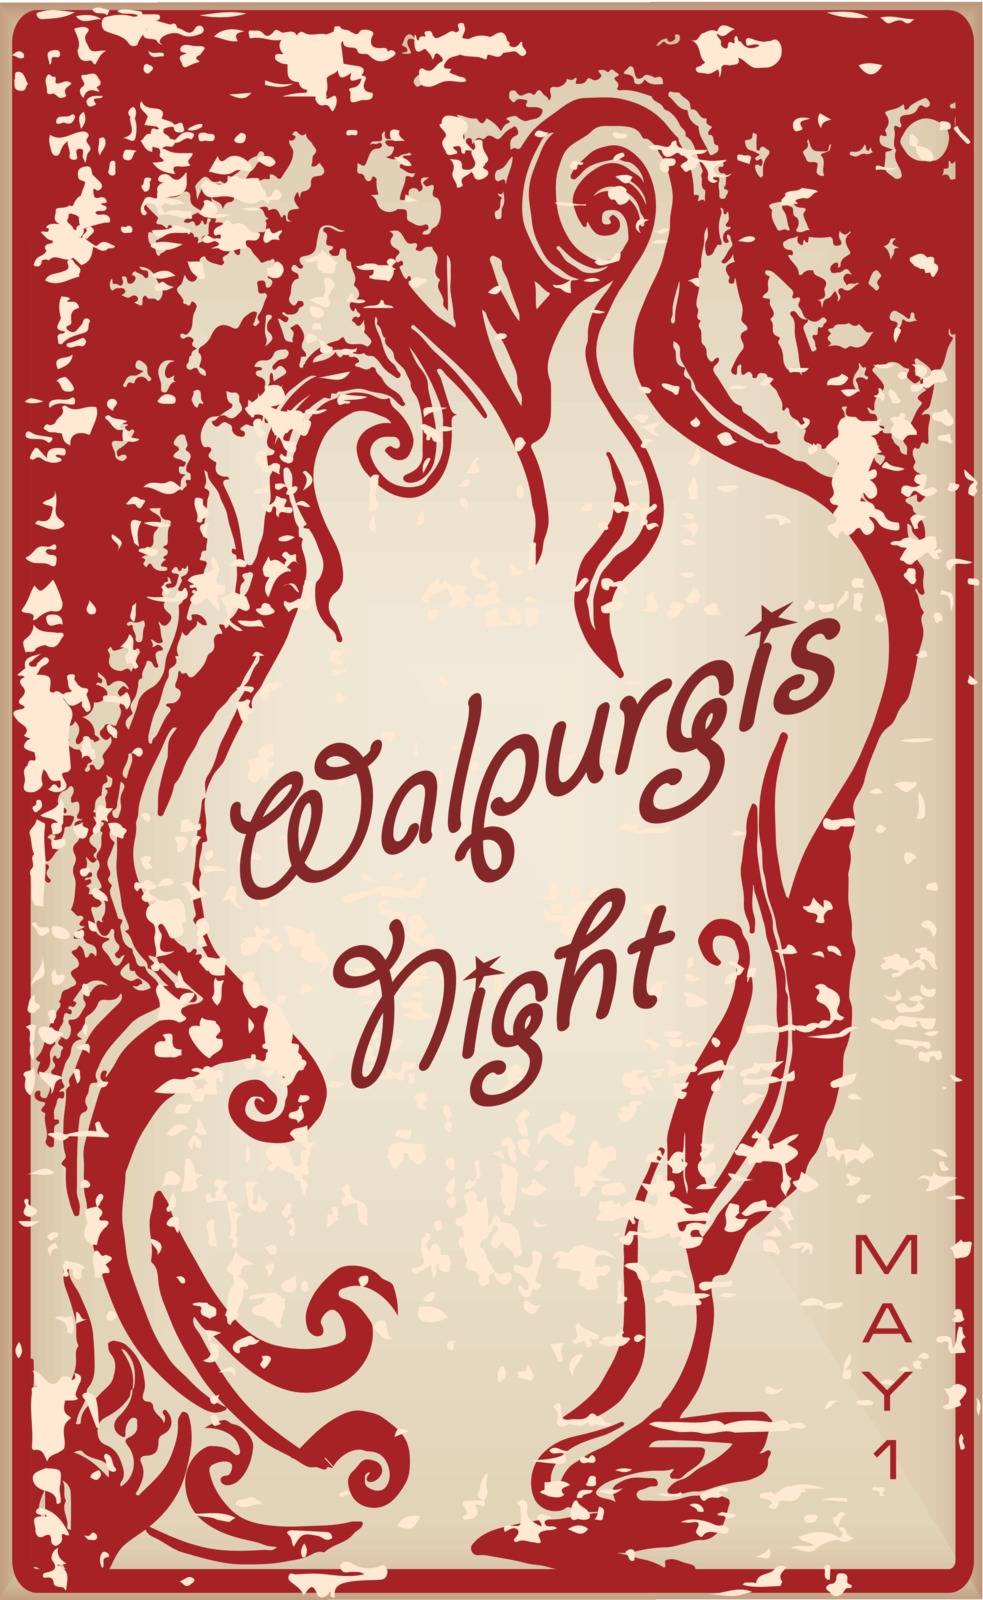 Walpurgis Night events mark the first of May. Vector illustration.